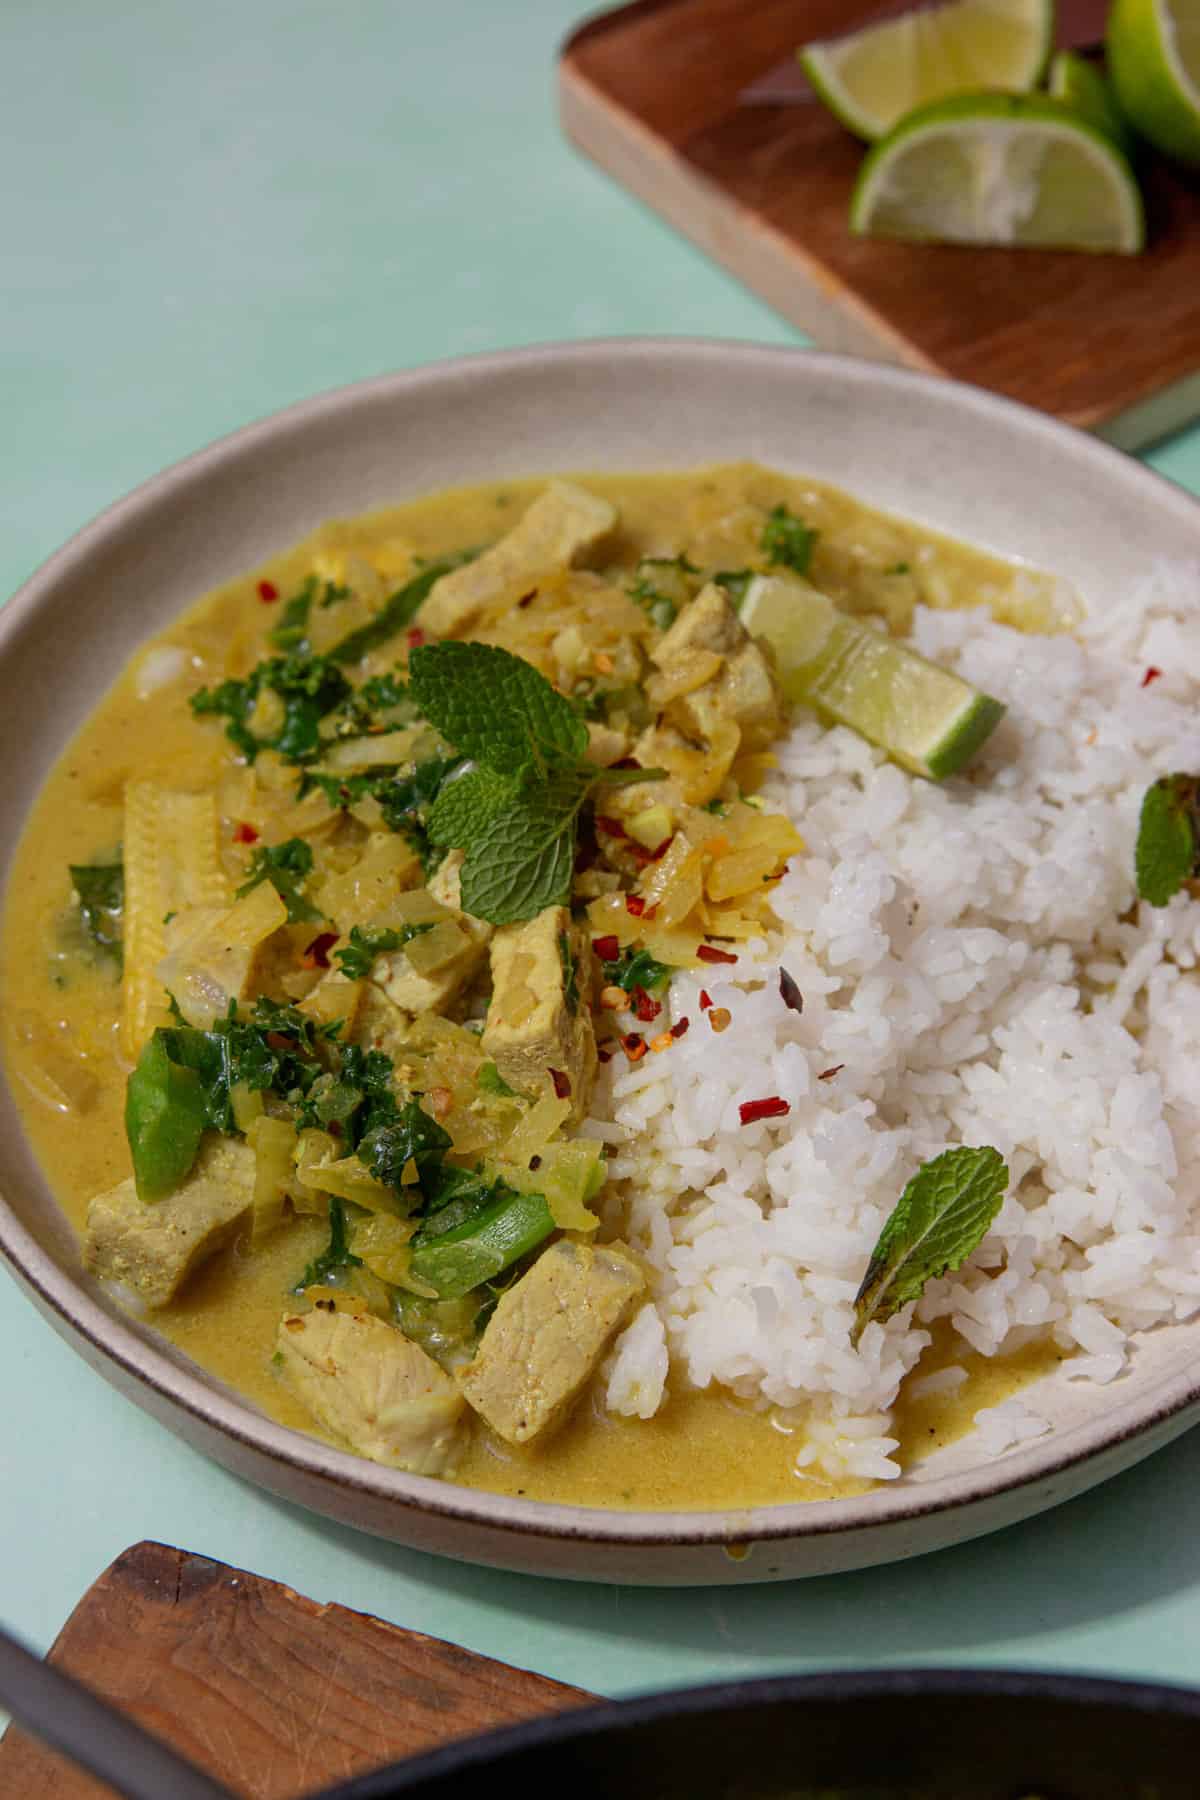 A bowl with rectangular pieces of pork with rice and a curry sauce, topped with fresh mint and a lime wedge.